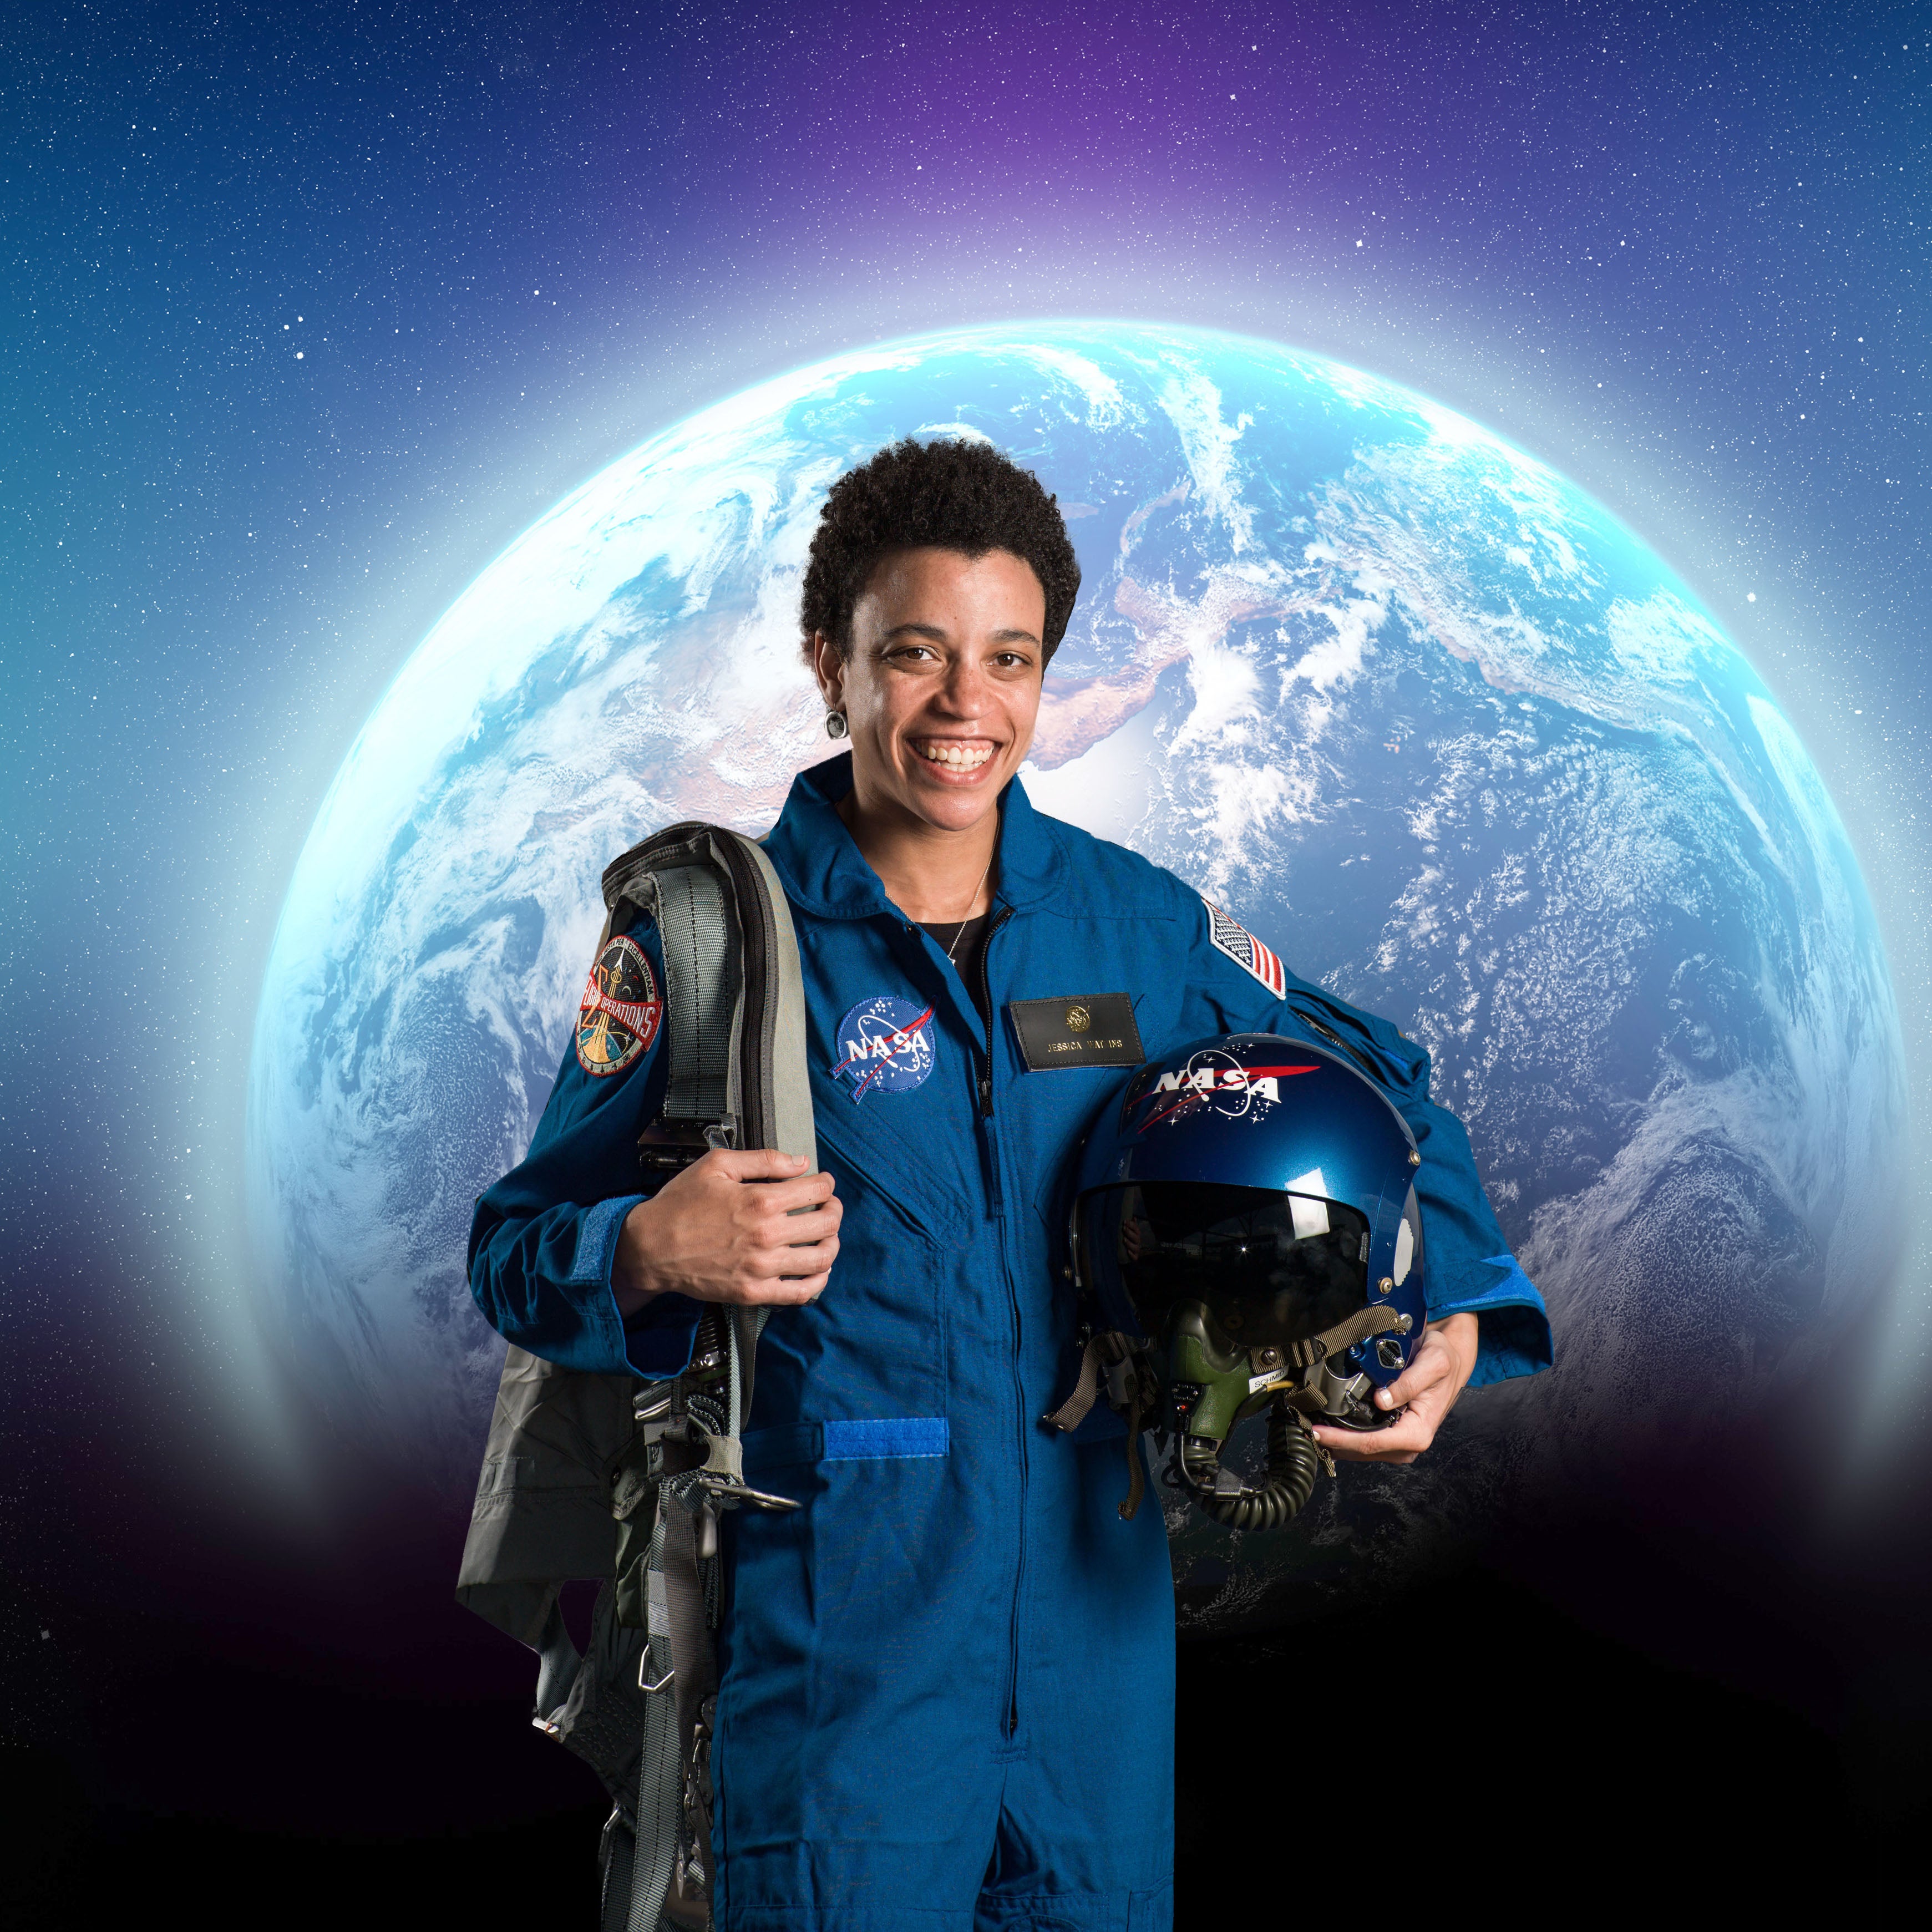 Girl Boss: 5 Things To Know About NASA's Newest Black Astronaut Candidate
